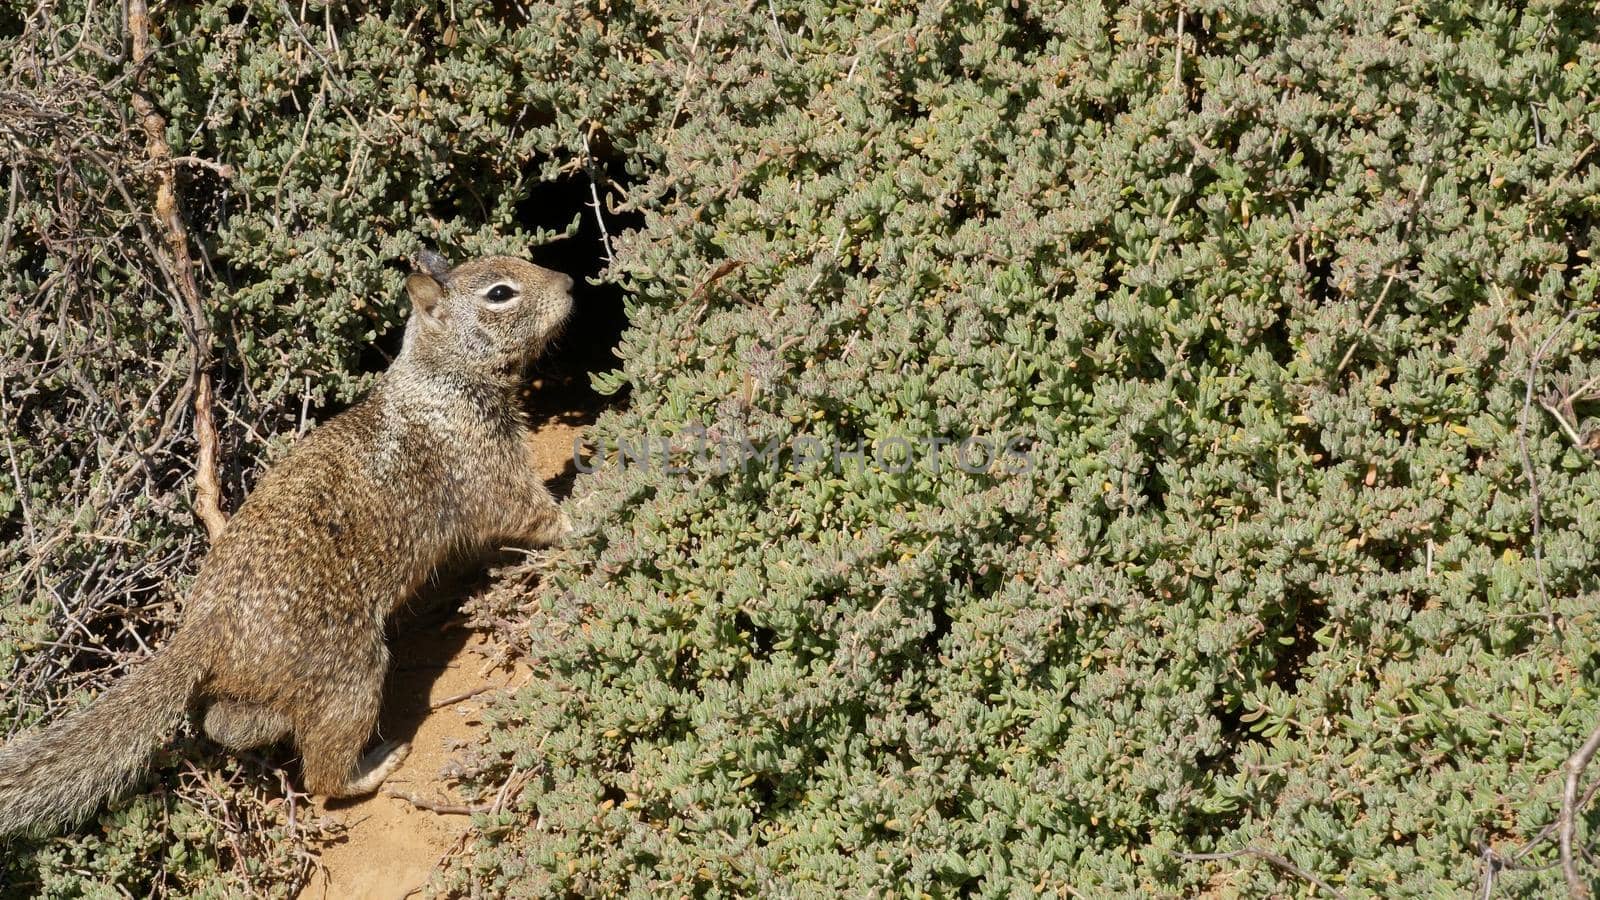 Beechey ground squirrel, common in California, Pacific coast, USA. Funny behavior of cute gray wild rodent. Small amusing animal in natural habitat. Pretty little endemic looking for food in America by DogoraSun